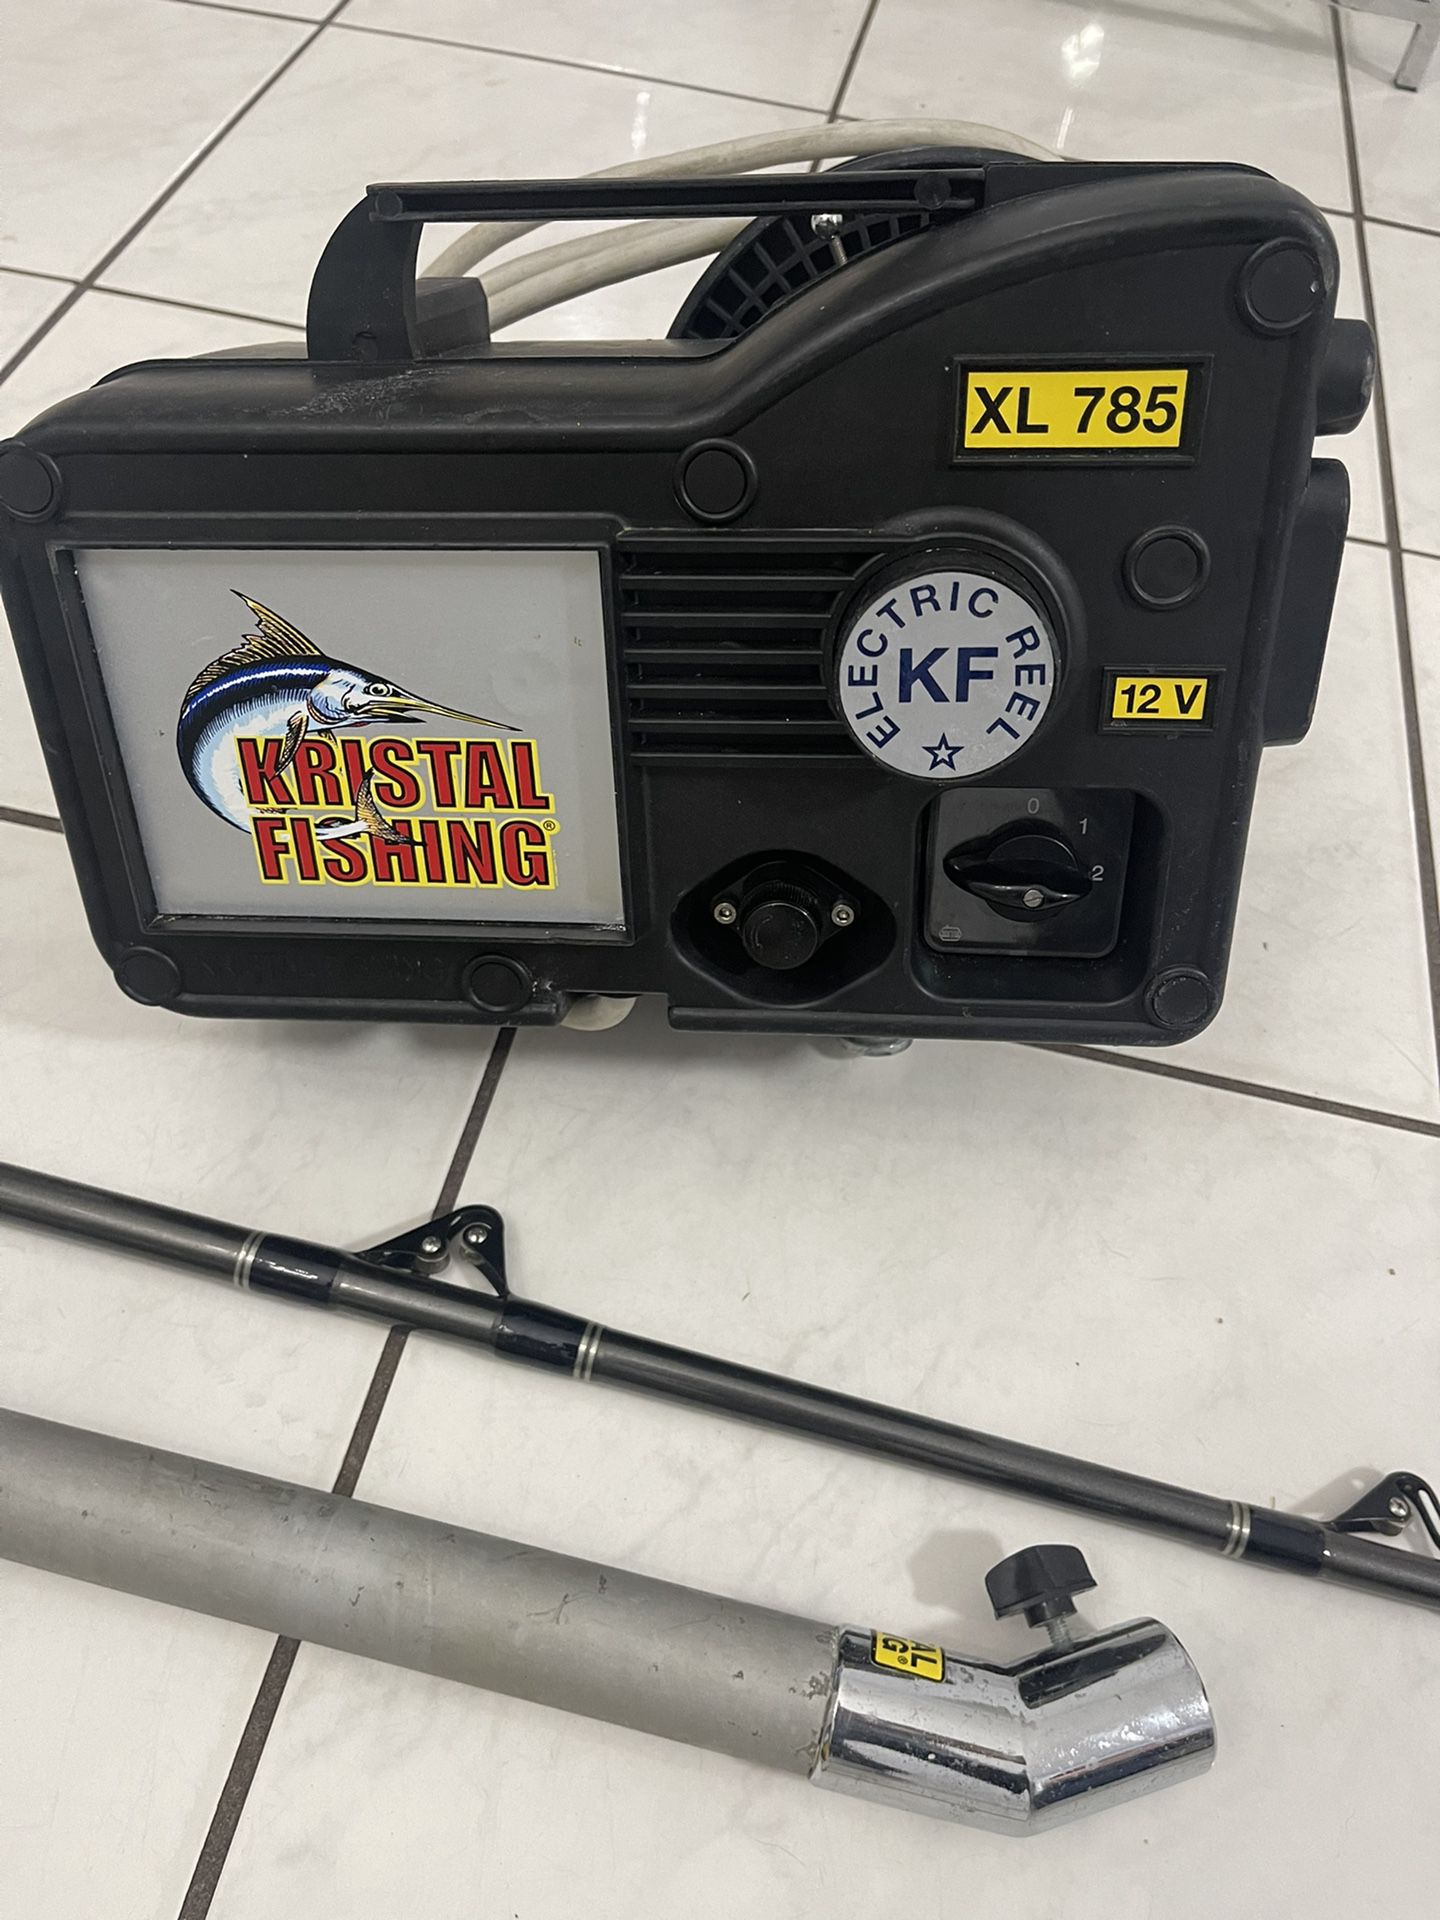 Kristal Fishing XL 785 Electric Reel for Sale in Miami, FL - OfferUp